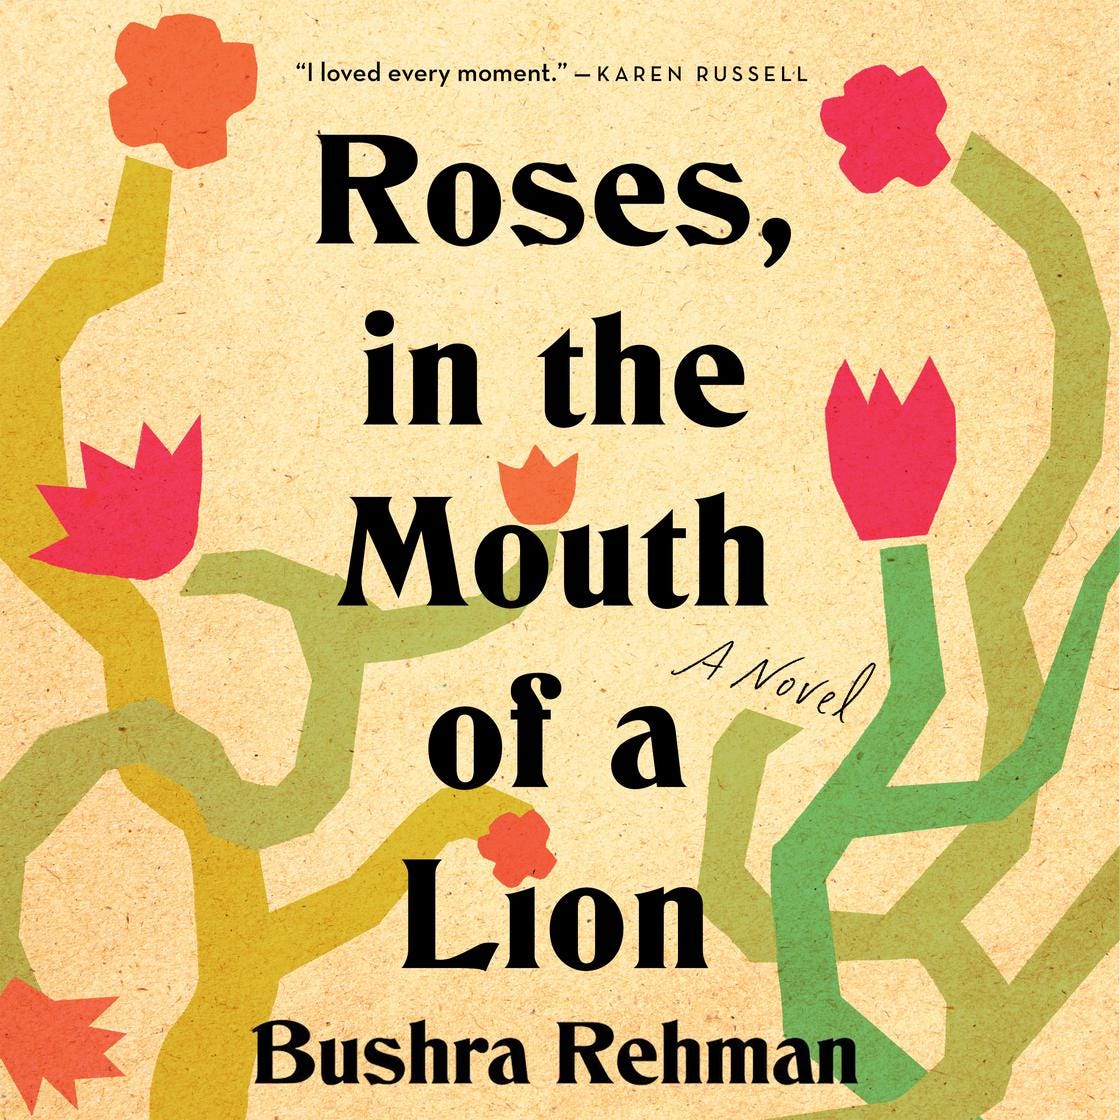 Cover of the audiobook of Roses, in the Mouth of a Lion.